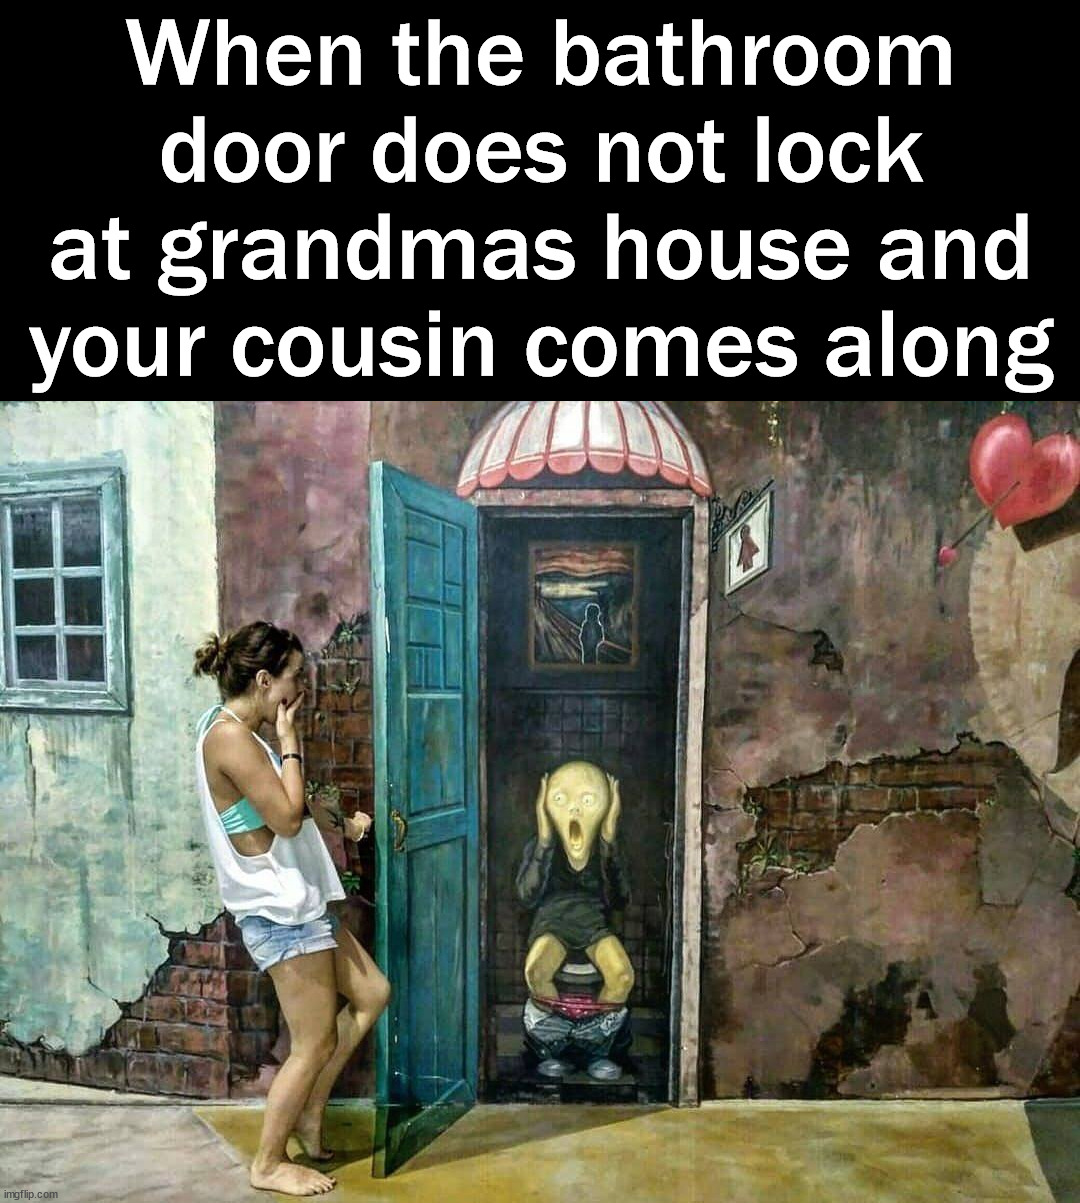 I always hate when someone opens the door when you are doing your business |  When the bathroom door does not lock at grandmas house and your cousin comes along | image tagged in bathroom,thanksgiving dinner,privacy | made w/ Imgflip meme maker